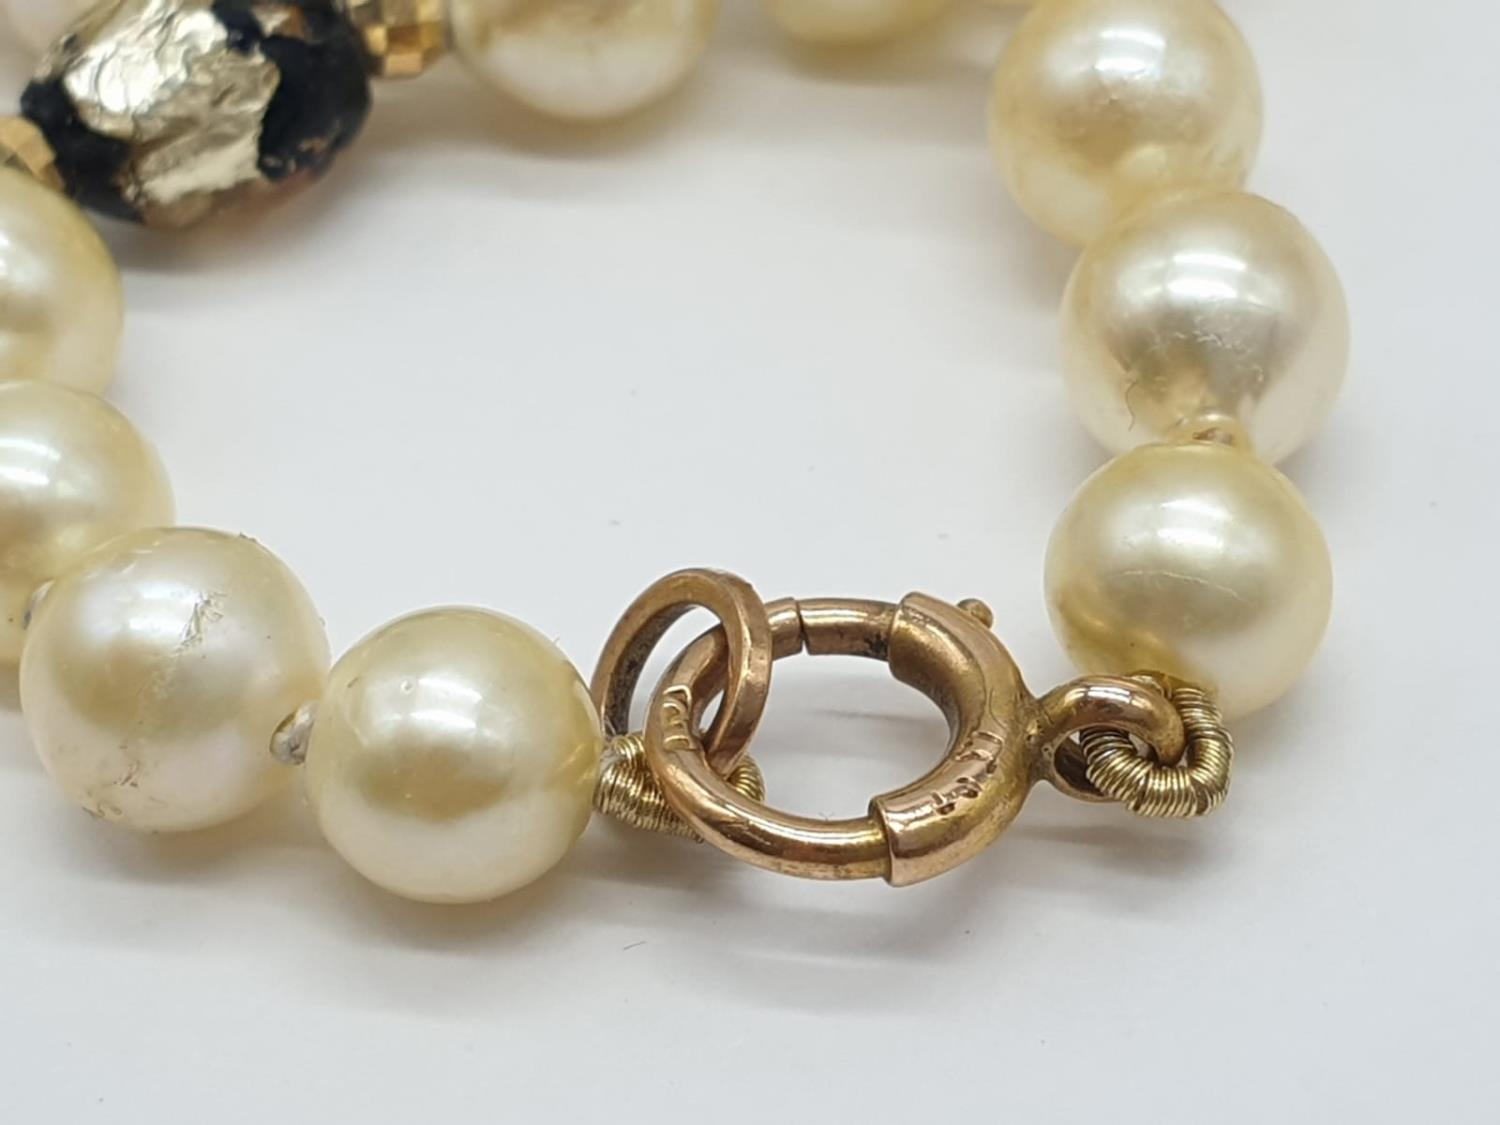 Cultured Pearl and Merano Glass N ECKLACE with 9ct Gold trim and clasp. 28.5g 40cm. - Image 6 of 7